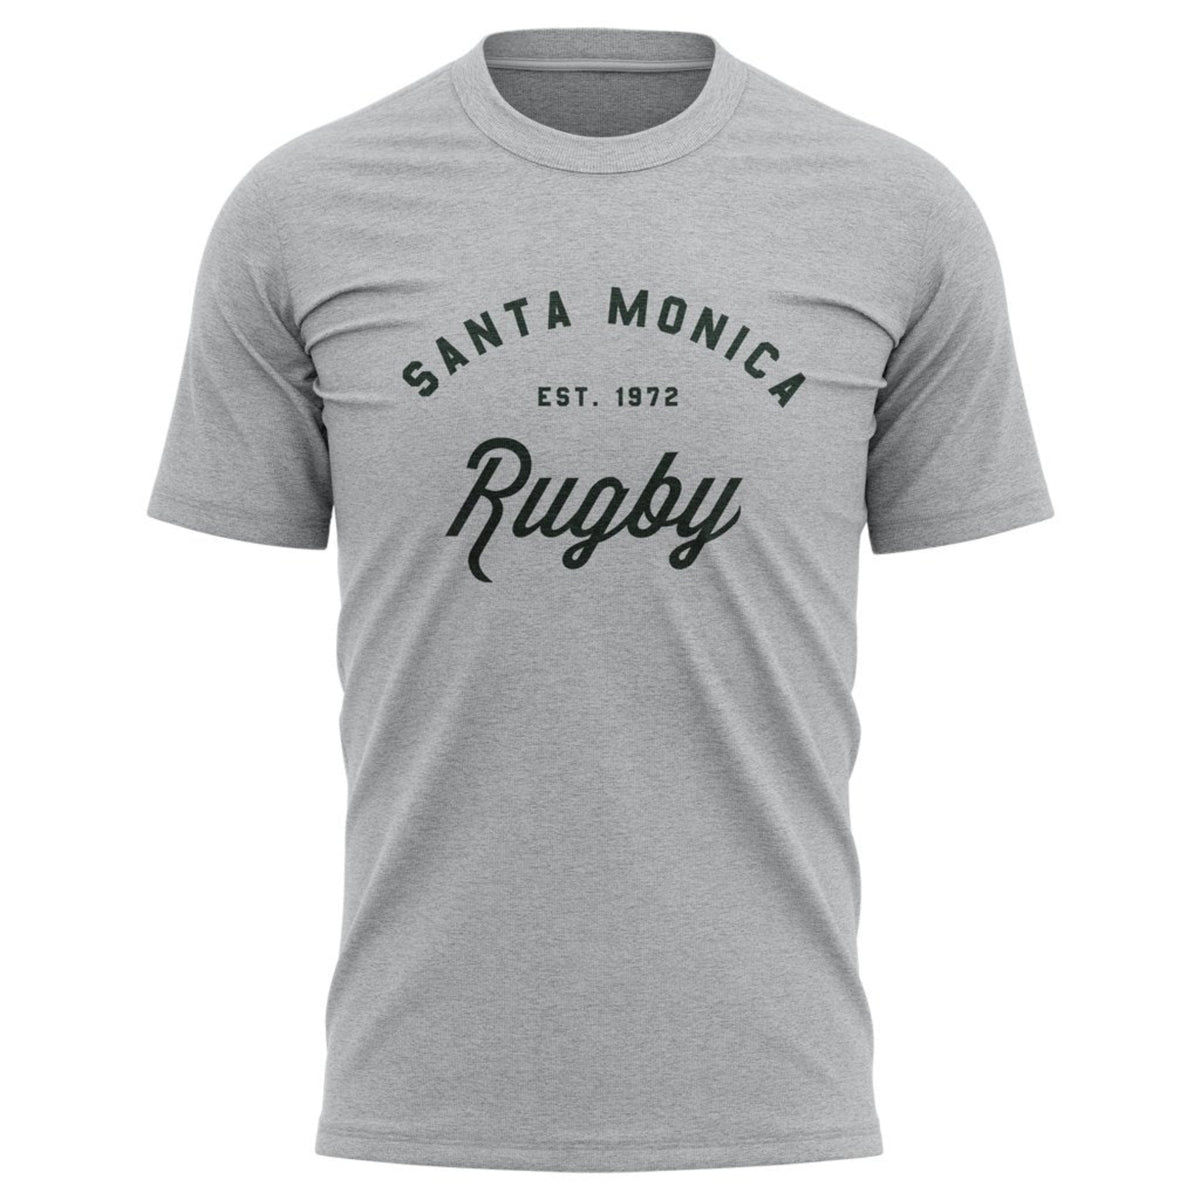 Santa Monica Rugby Club &quot;Classic&quot; Tee - Youth Black Or Grey - www.therugbyshop.com www.therugbyshop.com YOUTH / ATHLETIC GREY / S XIX Brands TEES Santa Monica Rugby Club &quot;Classic&quot; Tee - Youth Black Or Grey